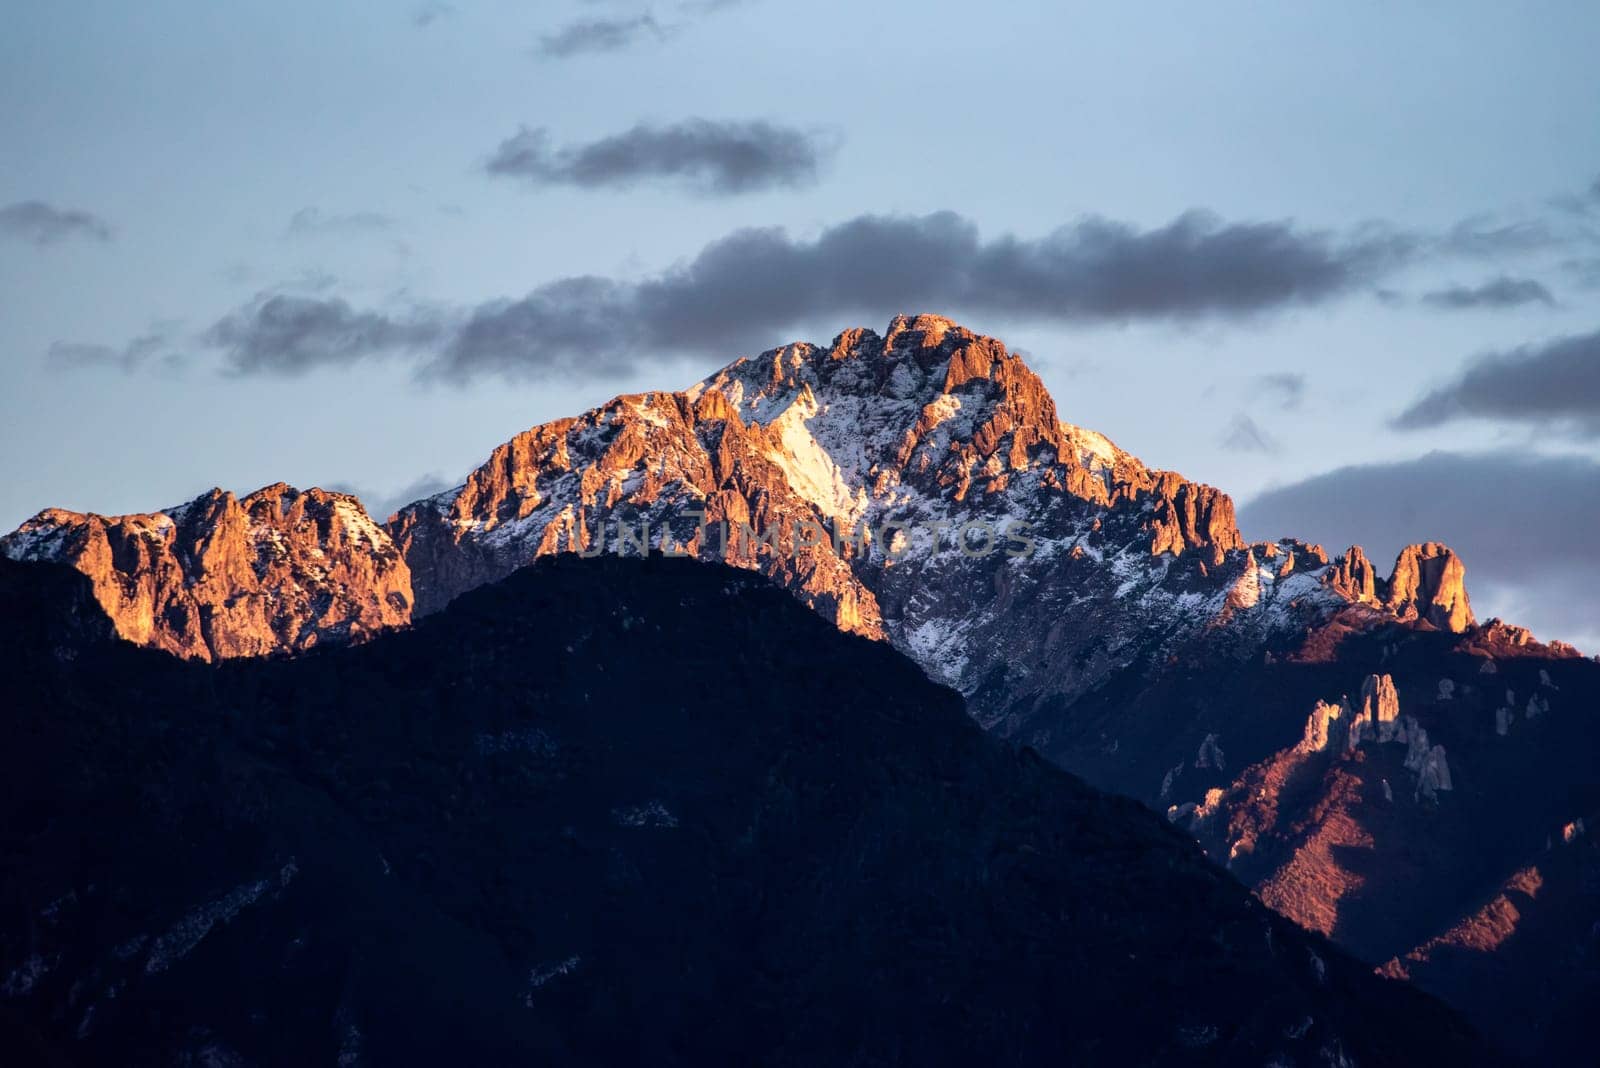 Sunset at snowcapped mount Grigna at lake Como, Italy